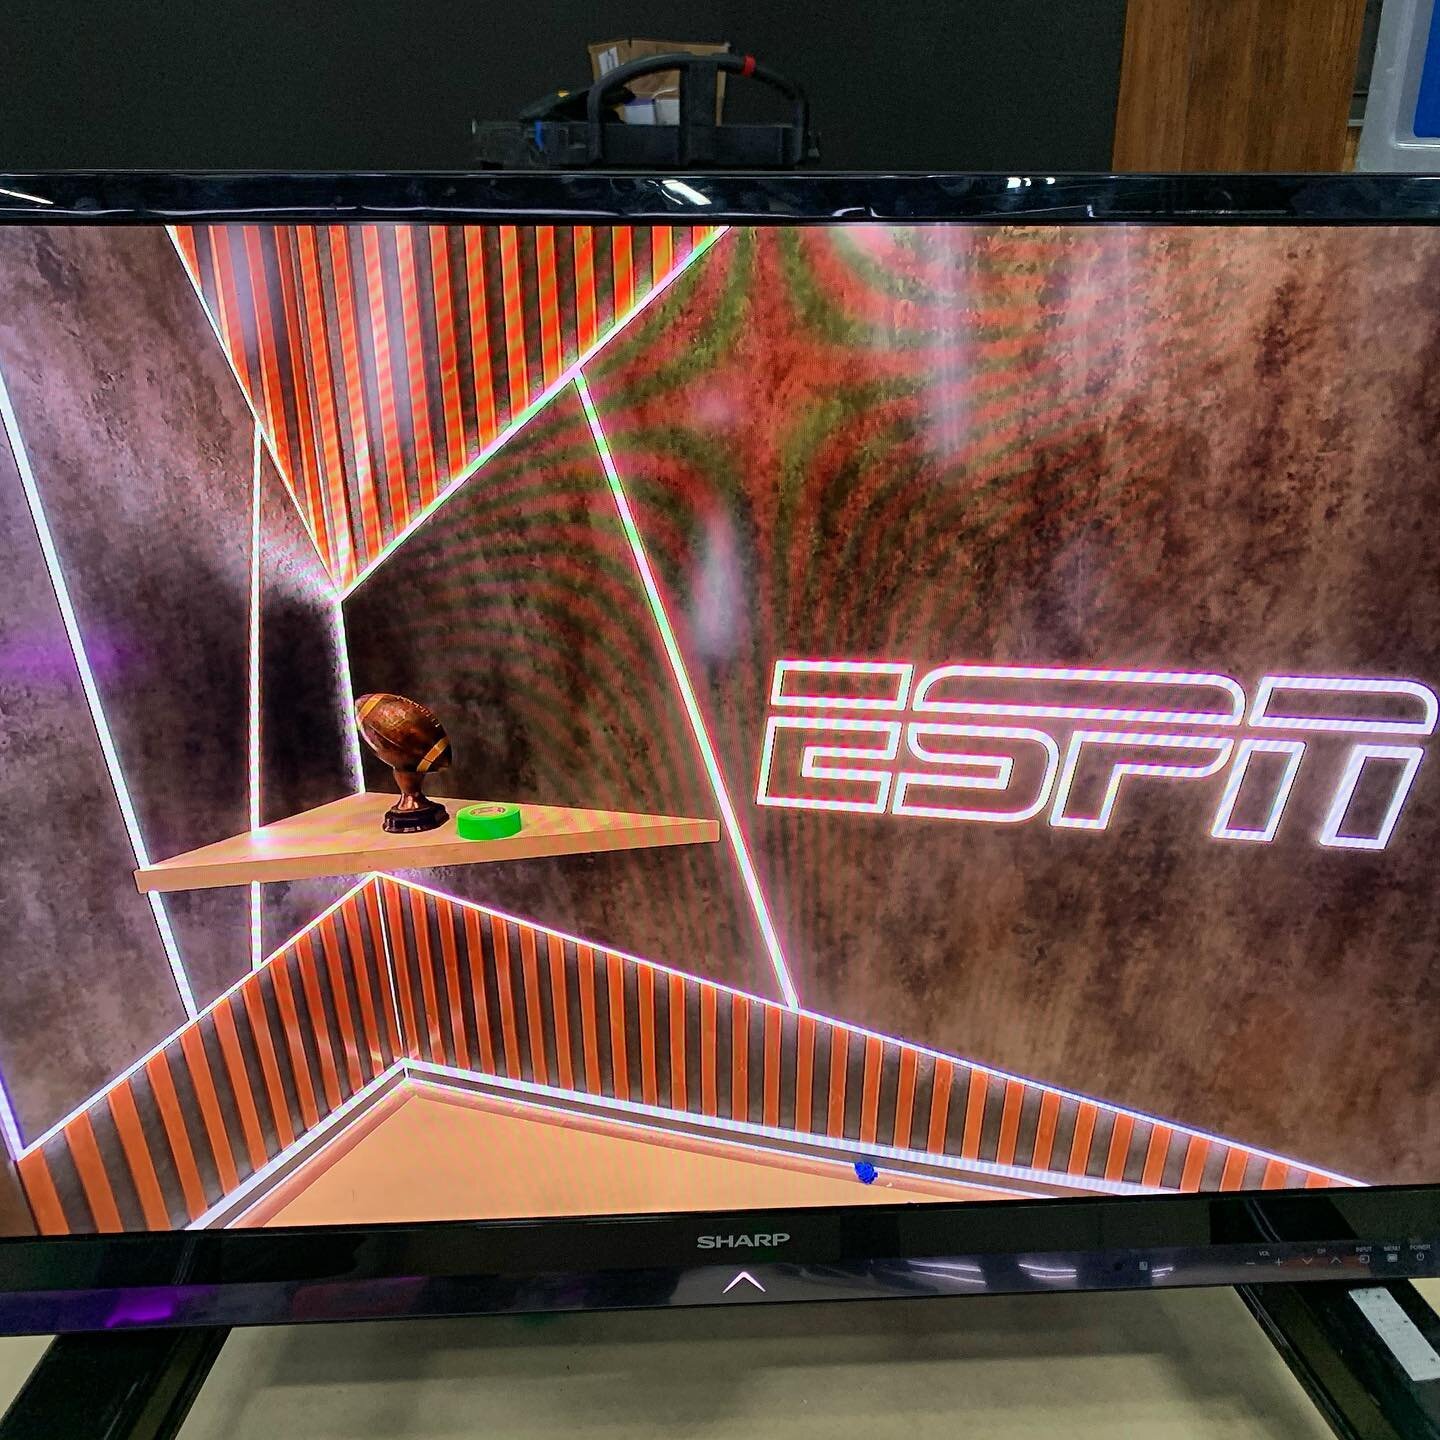 We just found out we&rsquo;ve won the Broadcast Production Award #newscaststudio for 2020 Sports Set Design for #espn #studioe 

Congrats to ESPN, @mysticscenic , and my awesome team!

#setdesign #setdesignaward #espn #setdesignlife #broadcastsetdesi